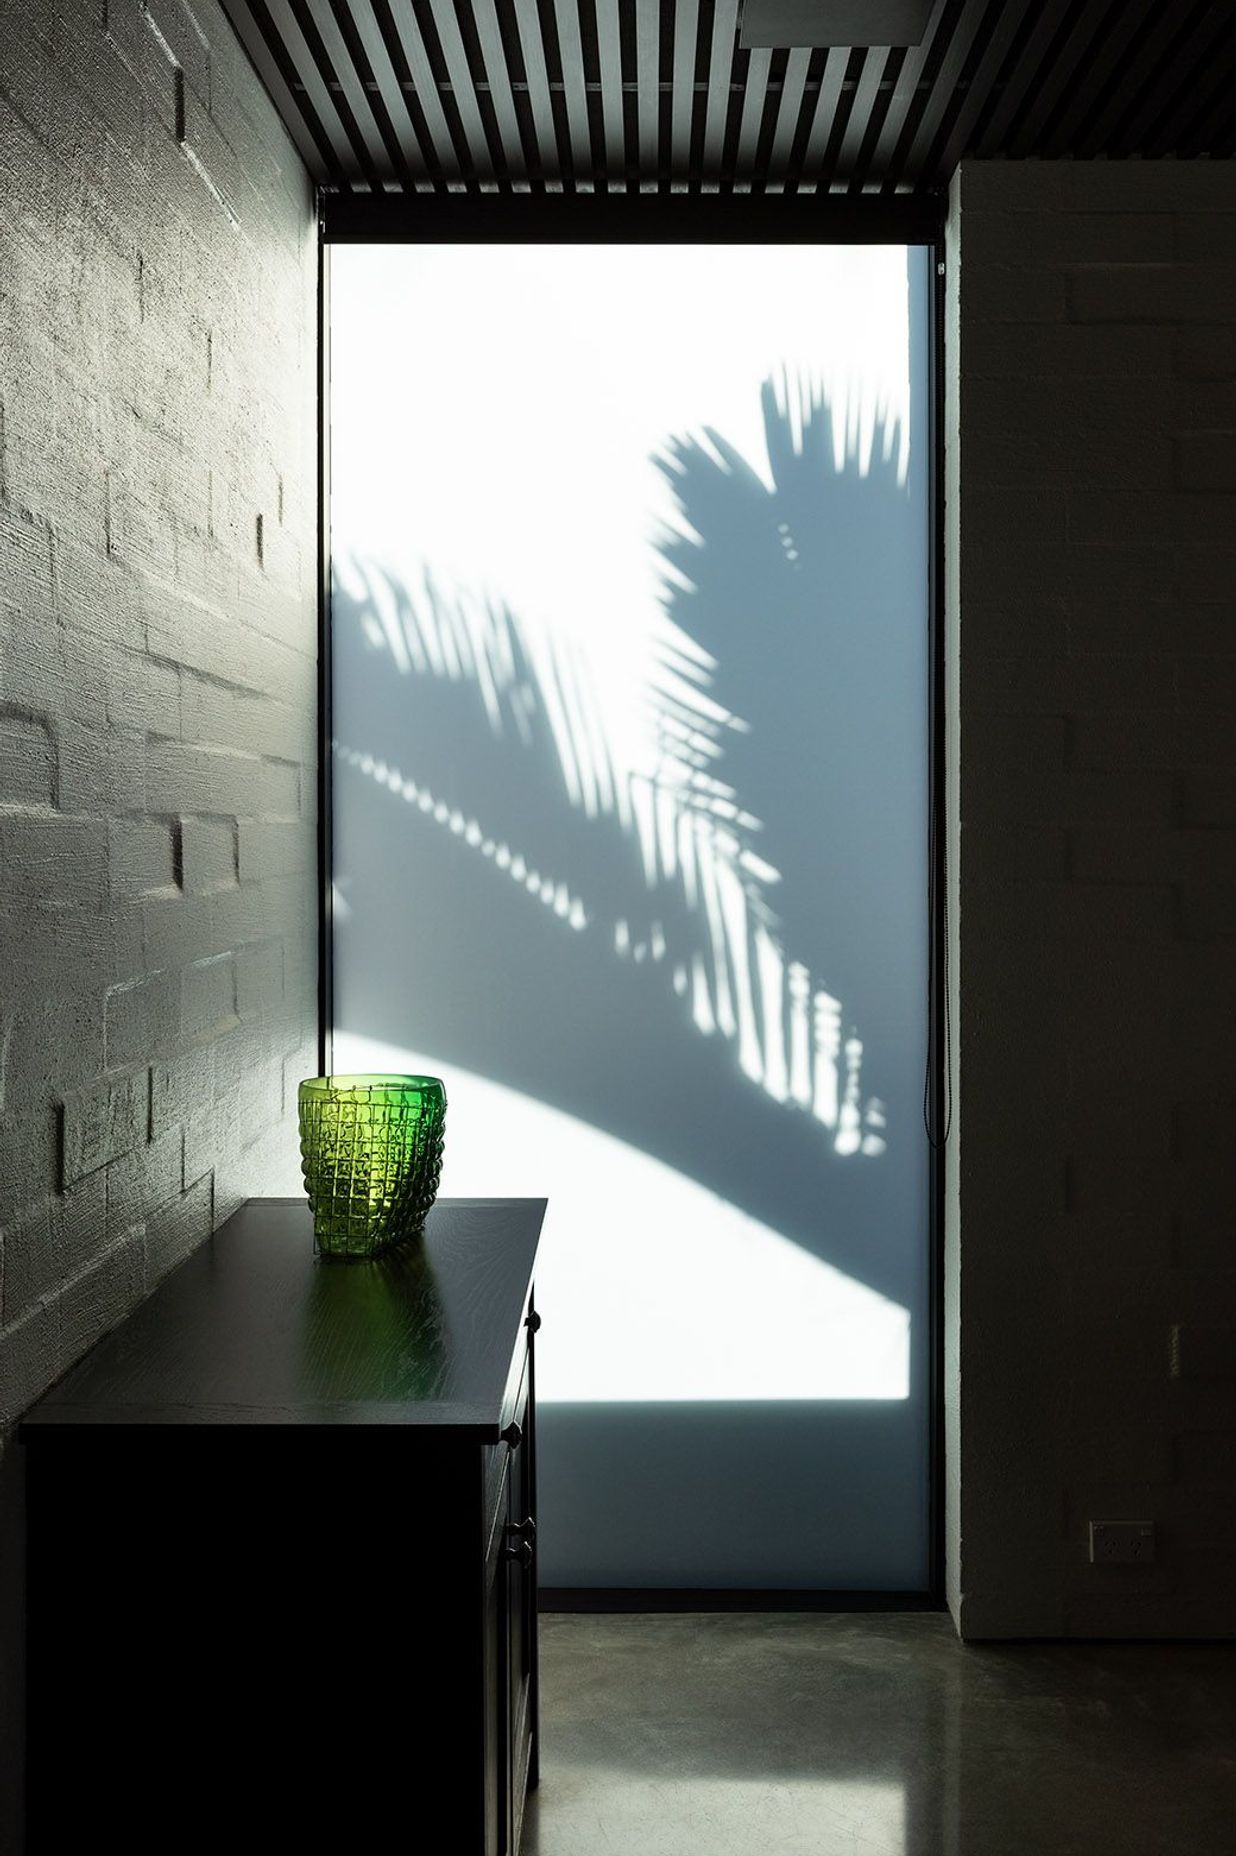 Light and dark, shadow and sun are key elements of the design.